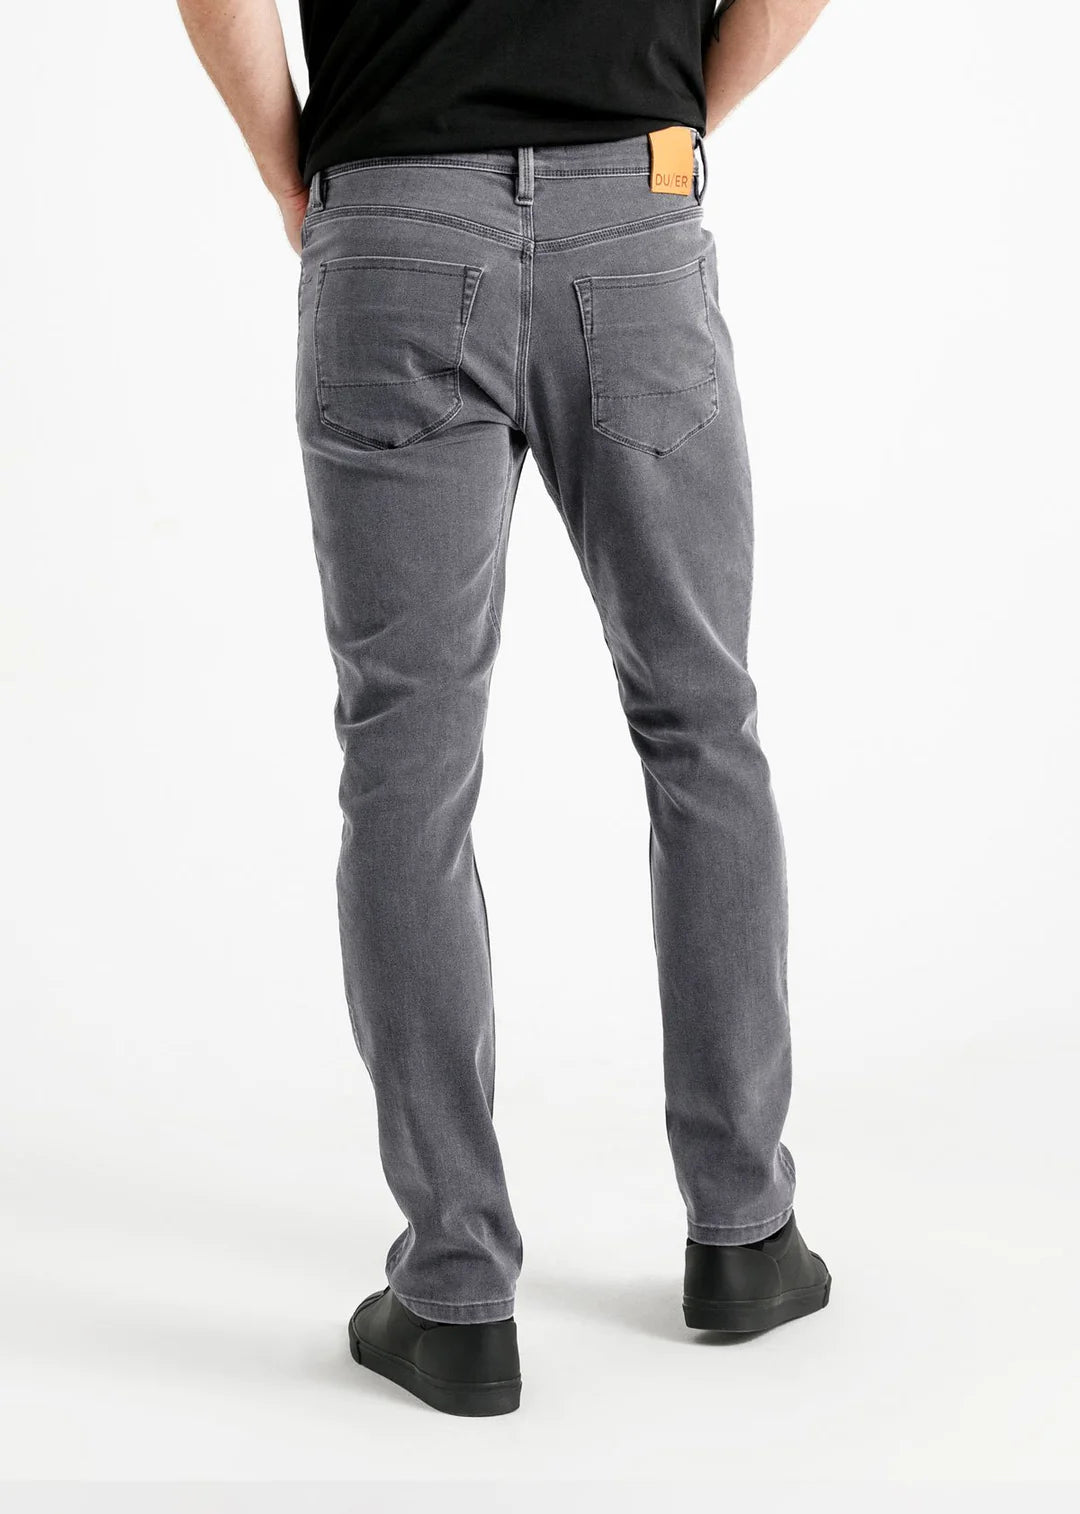 Duer M's Performance Denim Relax Taper 34L - Wearabouts Clothing Co.